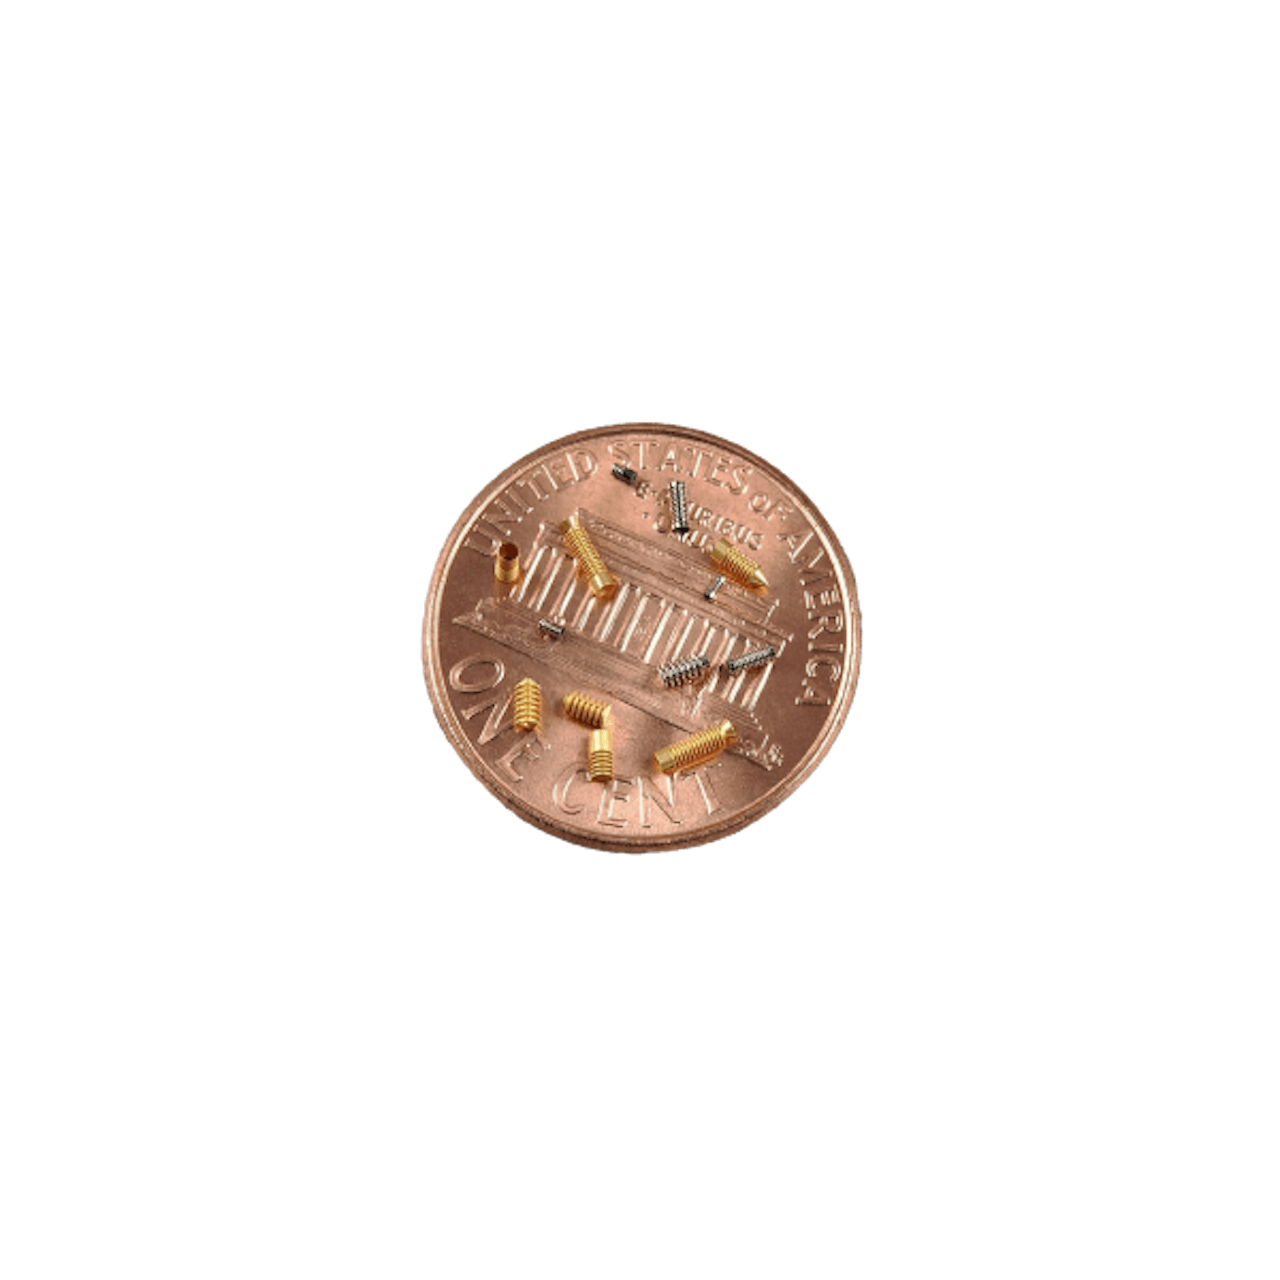 Micro bellows on face of penny transparent